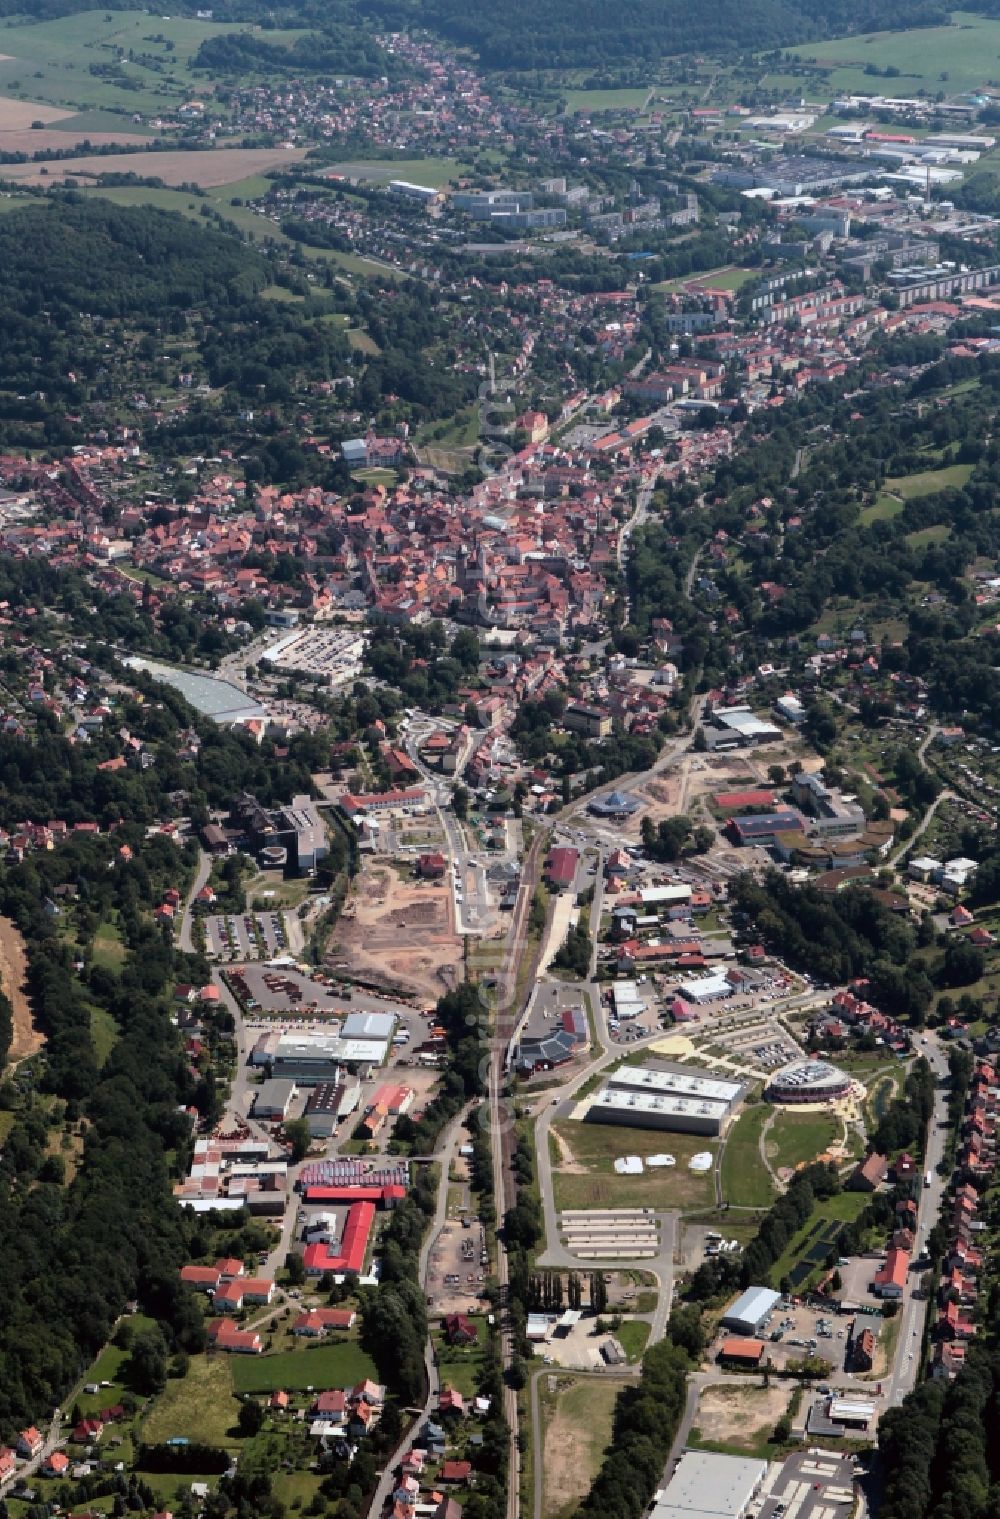 Aerial photograph Schmalkalden - Construction of a walk-chocolate box of Viba nougat world of confectionery manufacturer Viba sweets GmbH at the nougat Avenue in Schmalkalden in Thuringia